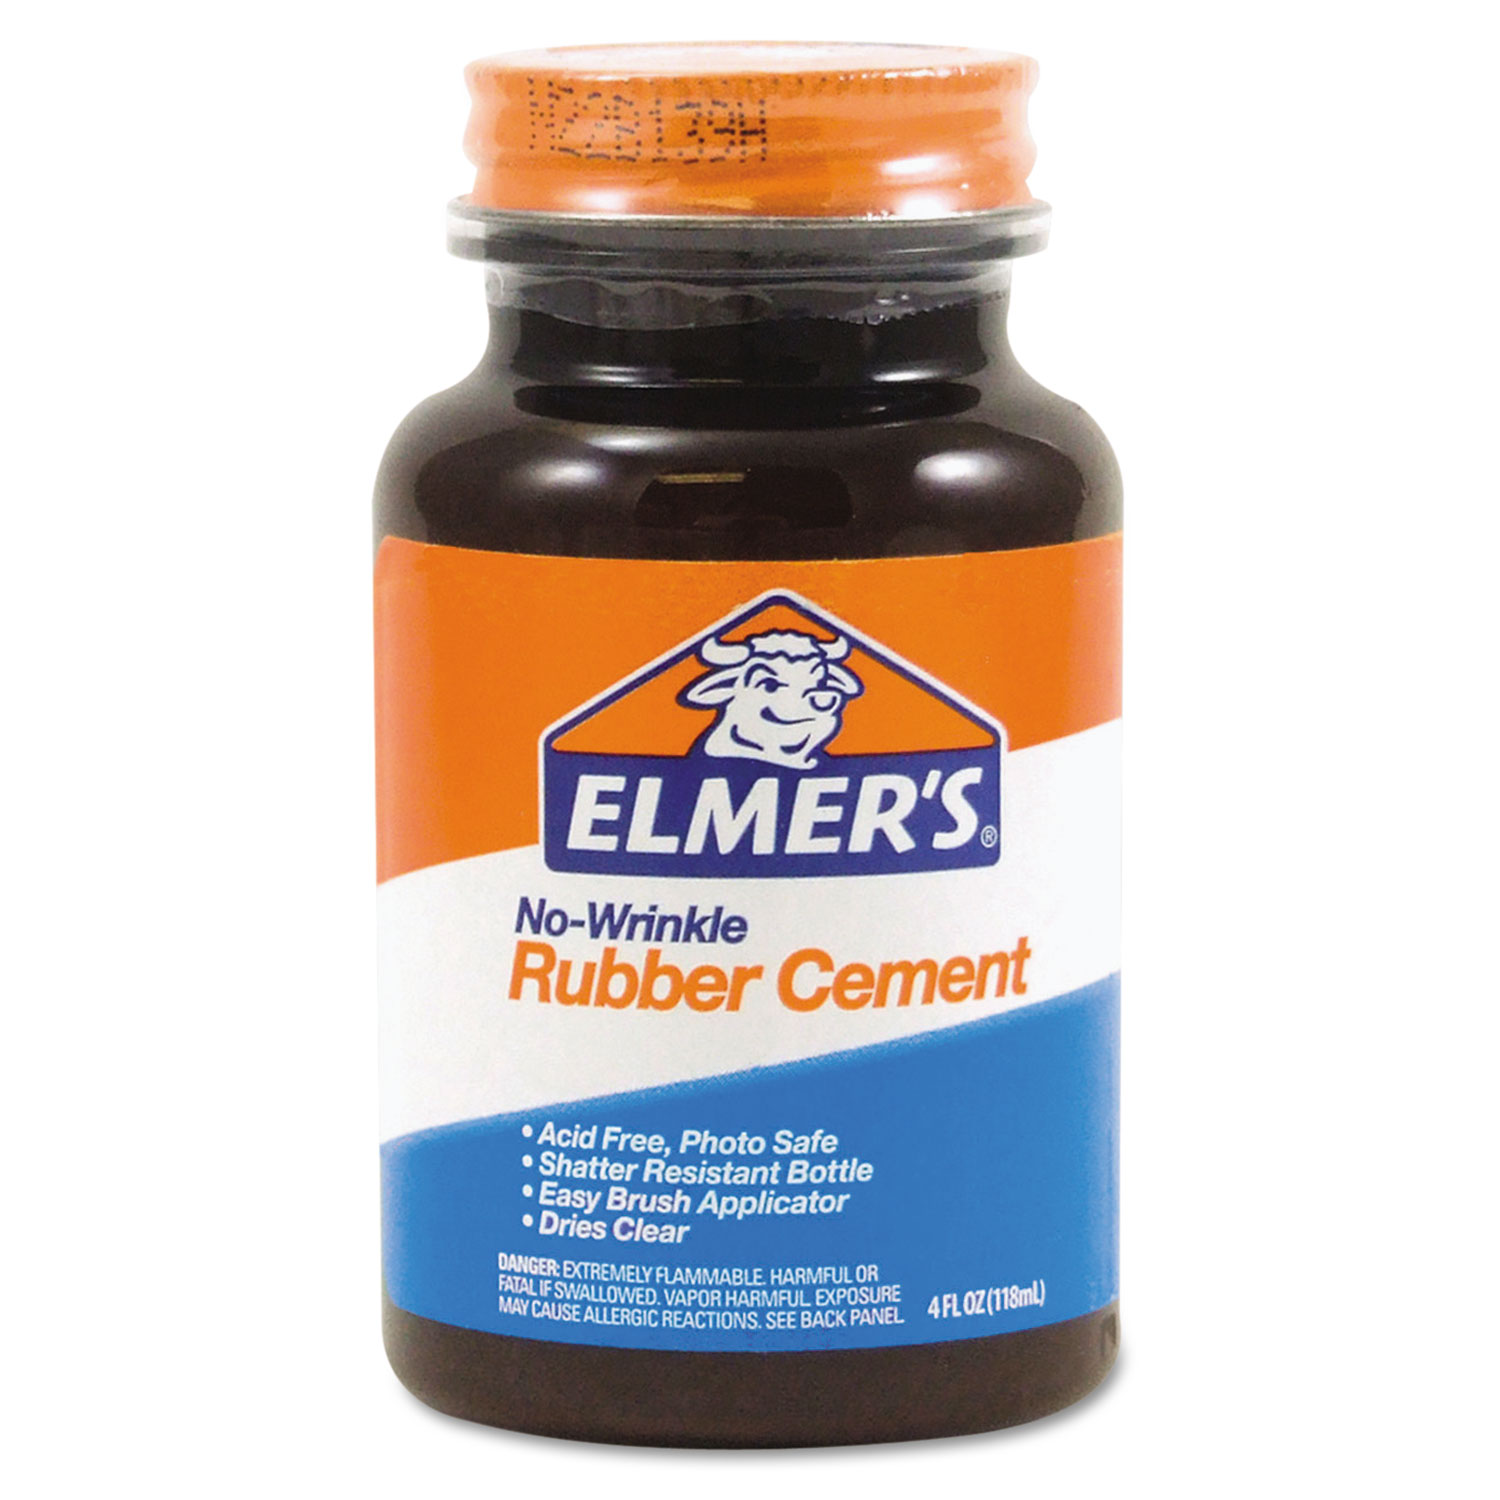  Elmer's E904 Rubber Cement with Brush Applicator, 4 oz, Dries Clear (EPIE904) 